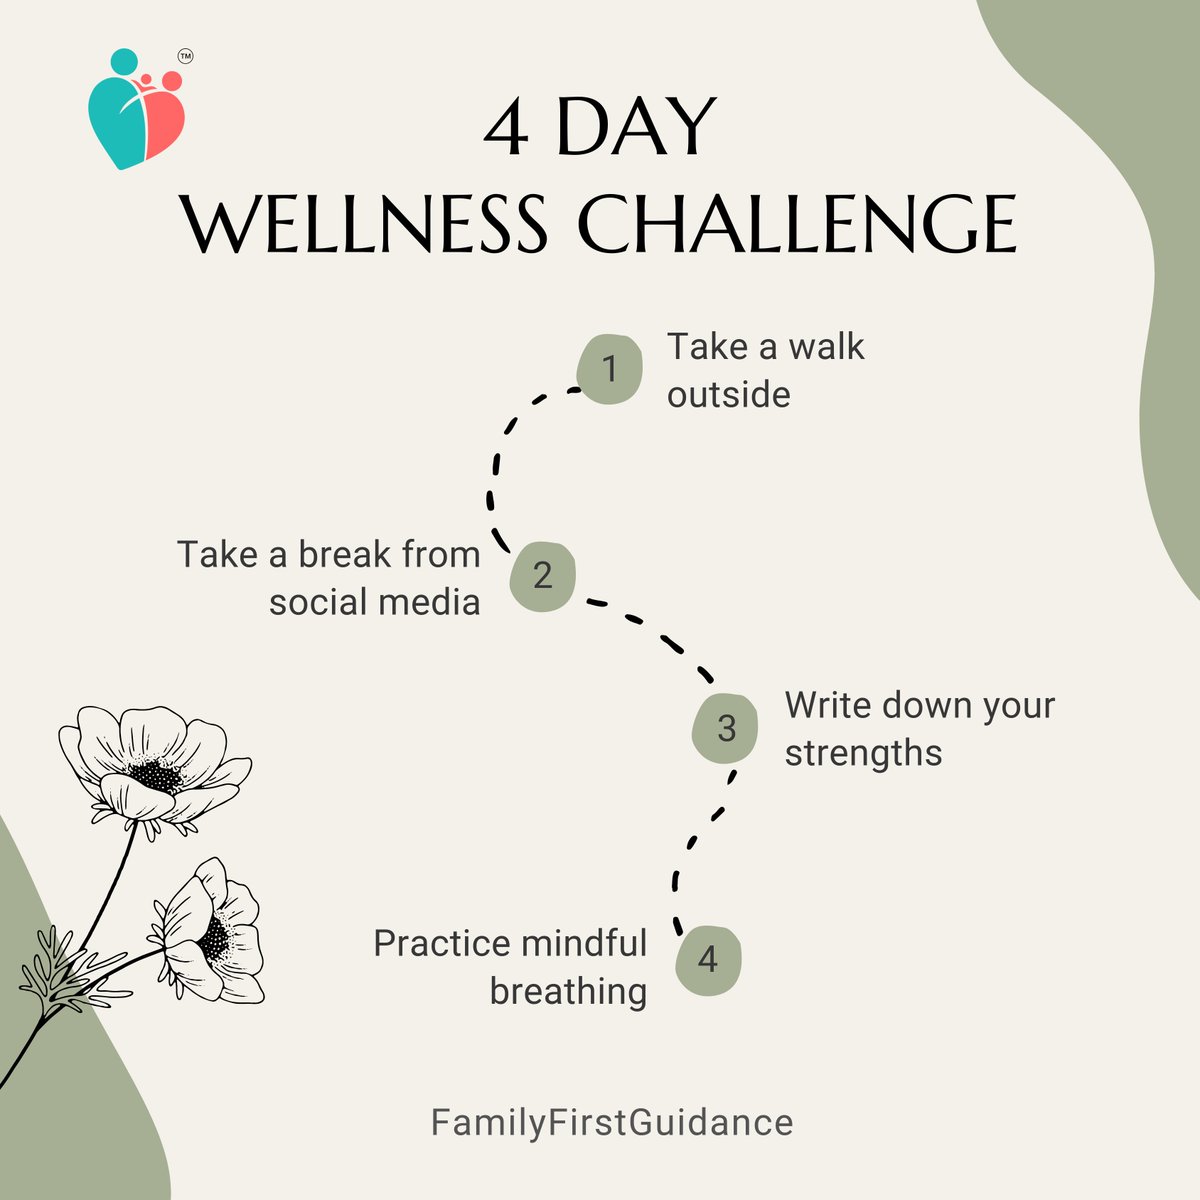 4-Day Recharge Challenge ✨
Recharge your mind, body & soul with these simple daily acts of self-care! #SelfCareChallenge #WellnessJourney

#familyfirstguidancecentre #mumbai #communitycentre
#jamamasjidmumbai #counsellingservices
#counsellingcentre